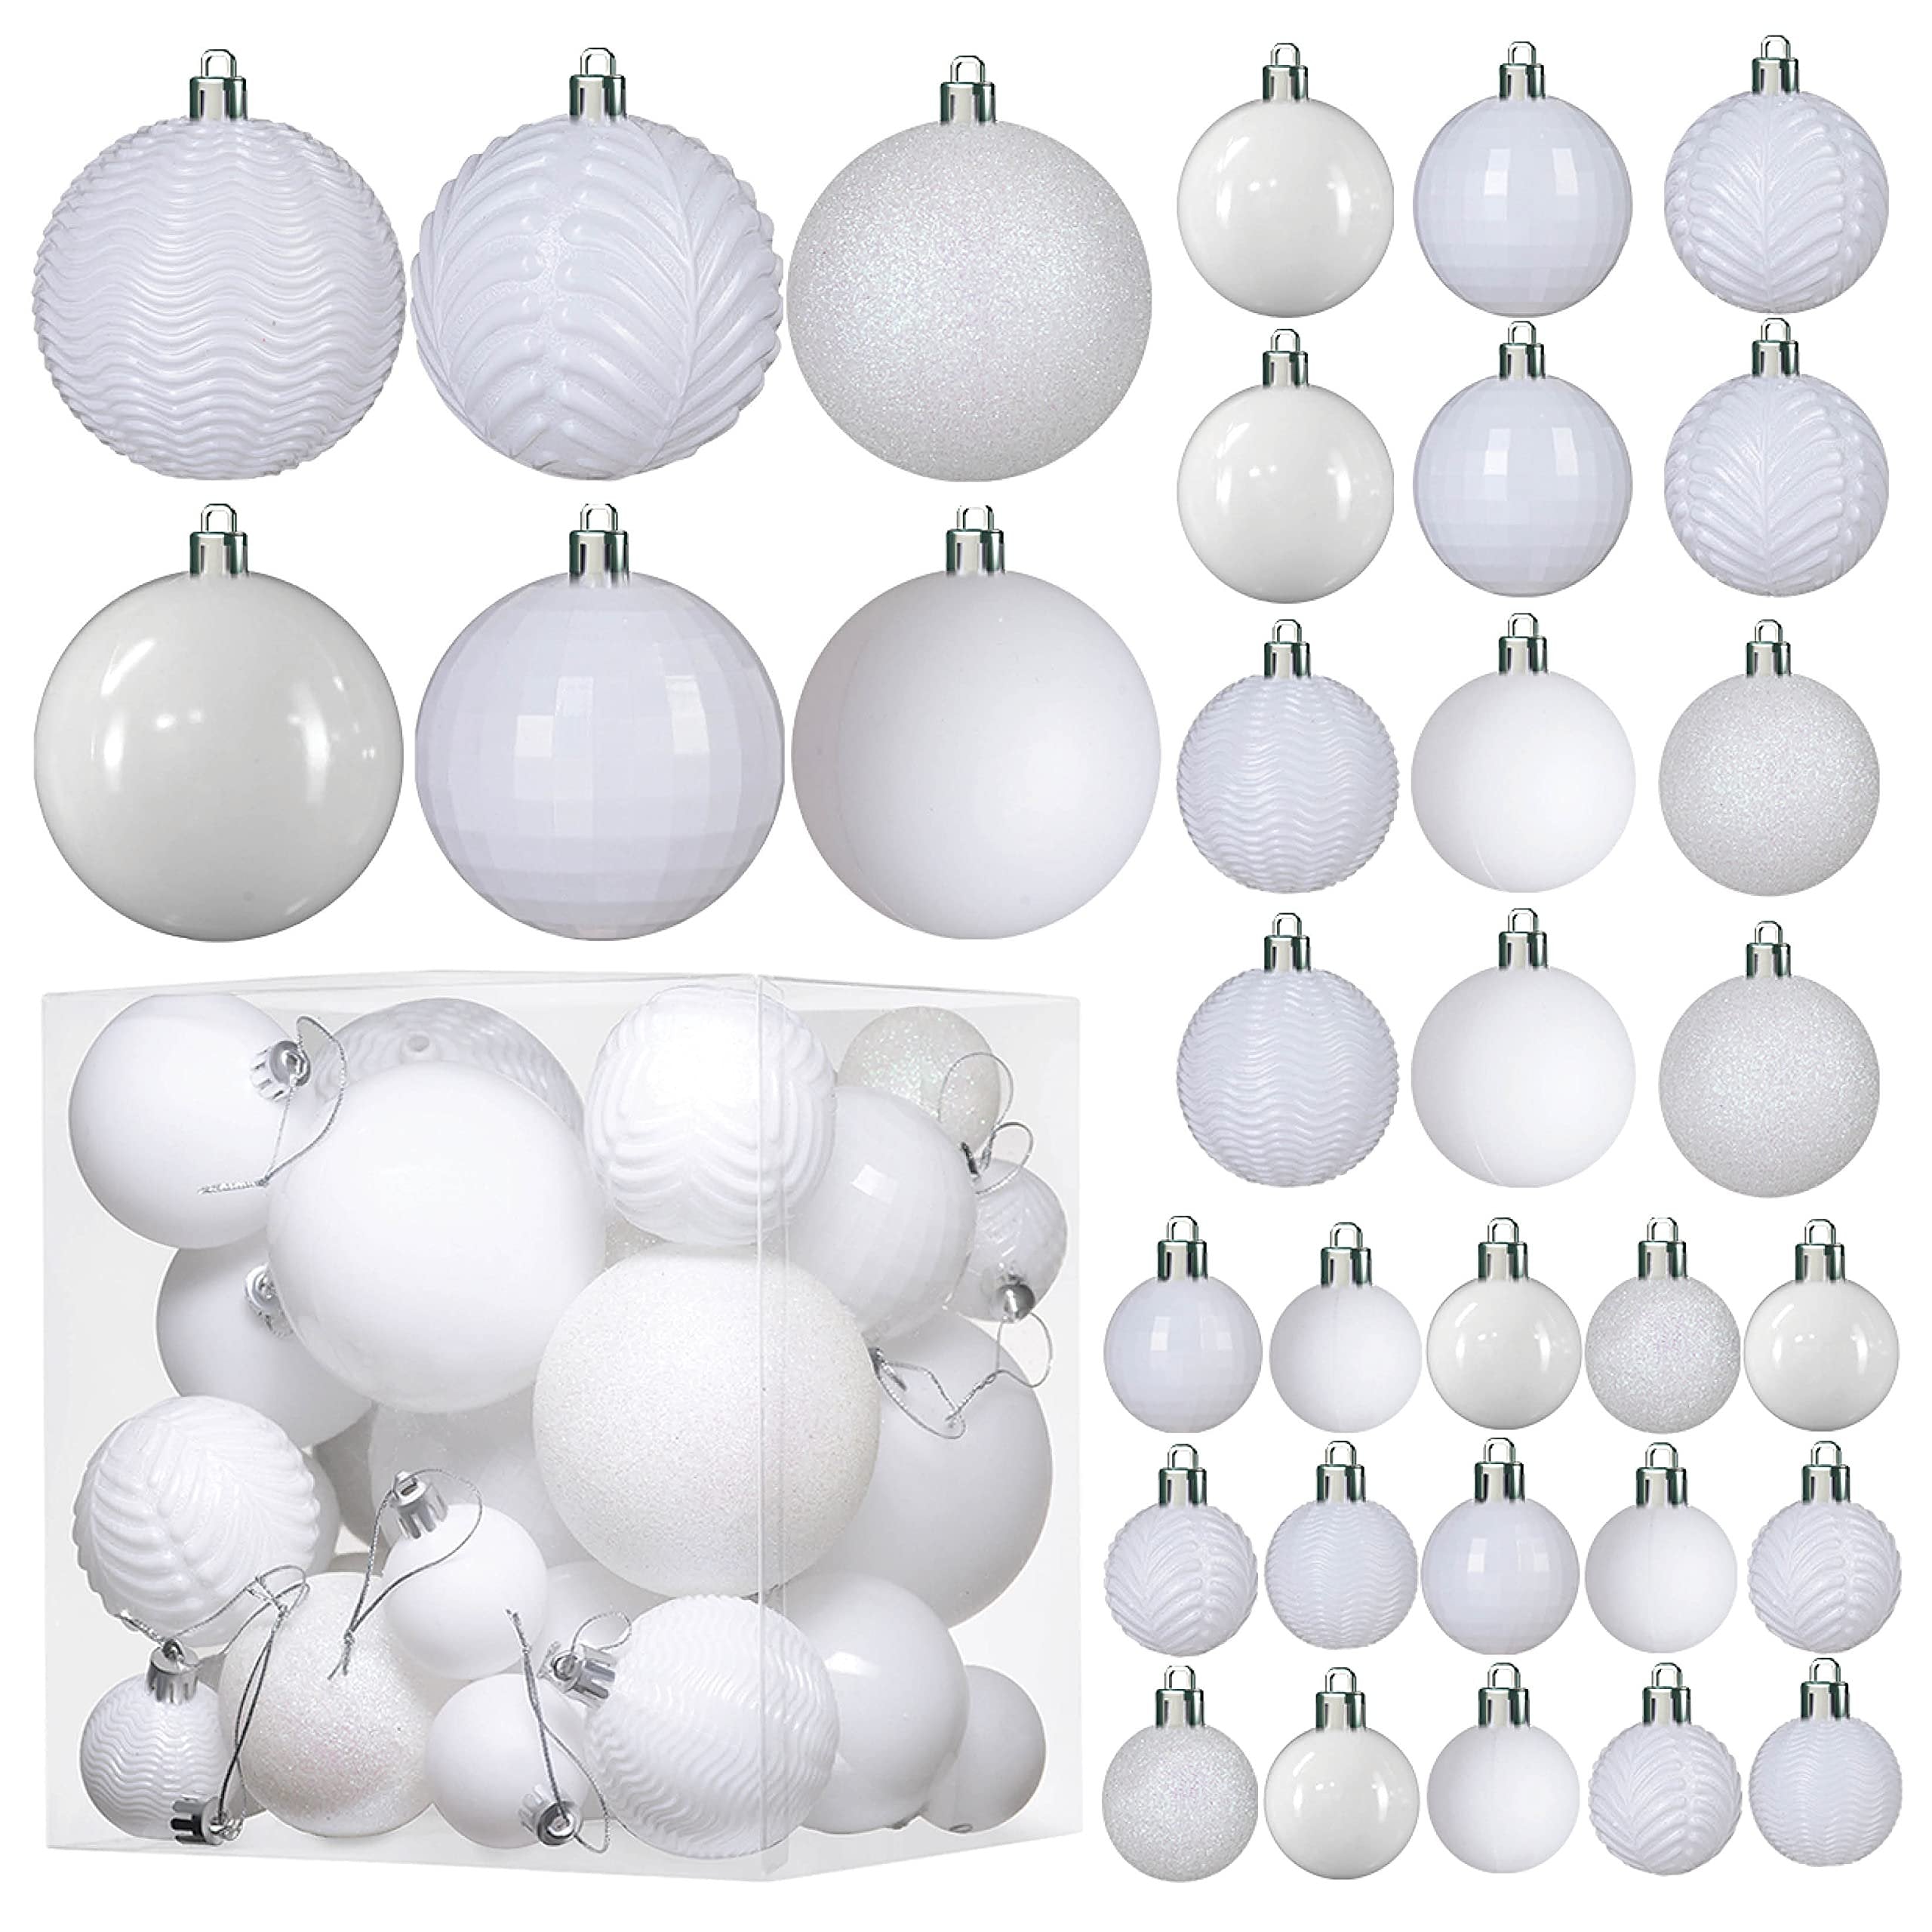 Prextex Christmas Ball Ornaments - White Christmas Ornaments Decorations | 36 pcs Xmas Tree Shatterproof Ornaments with Hanging Loop for Holiday, Wreath and Party Decorations (6 Styles in 3 Sizes)